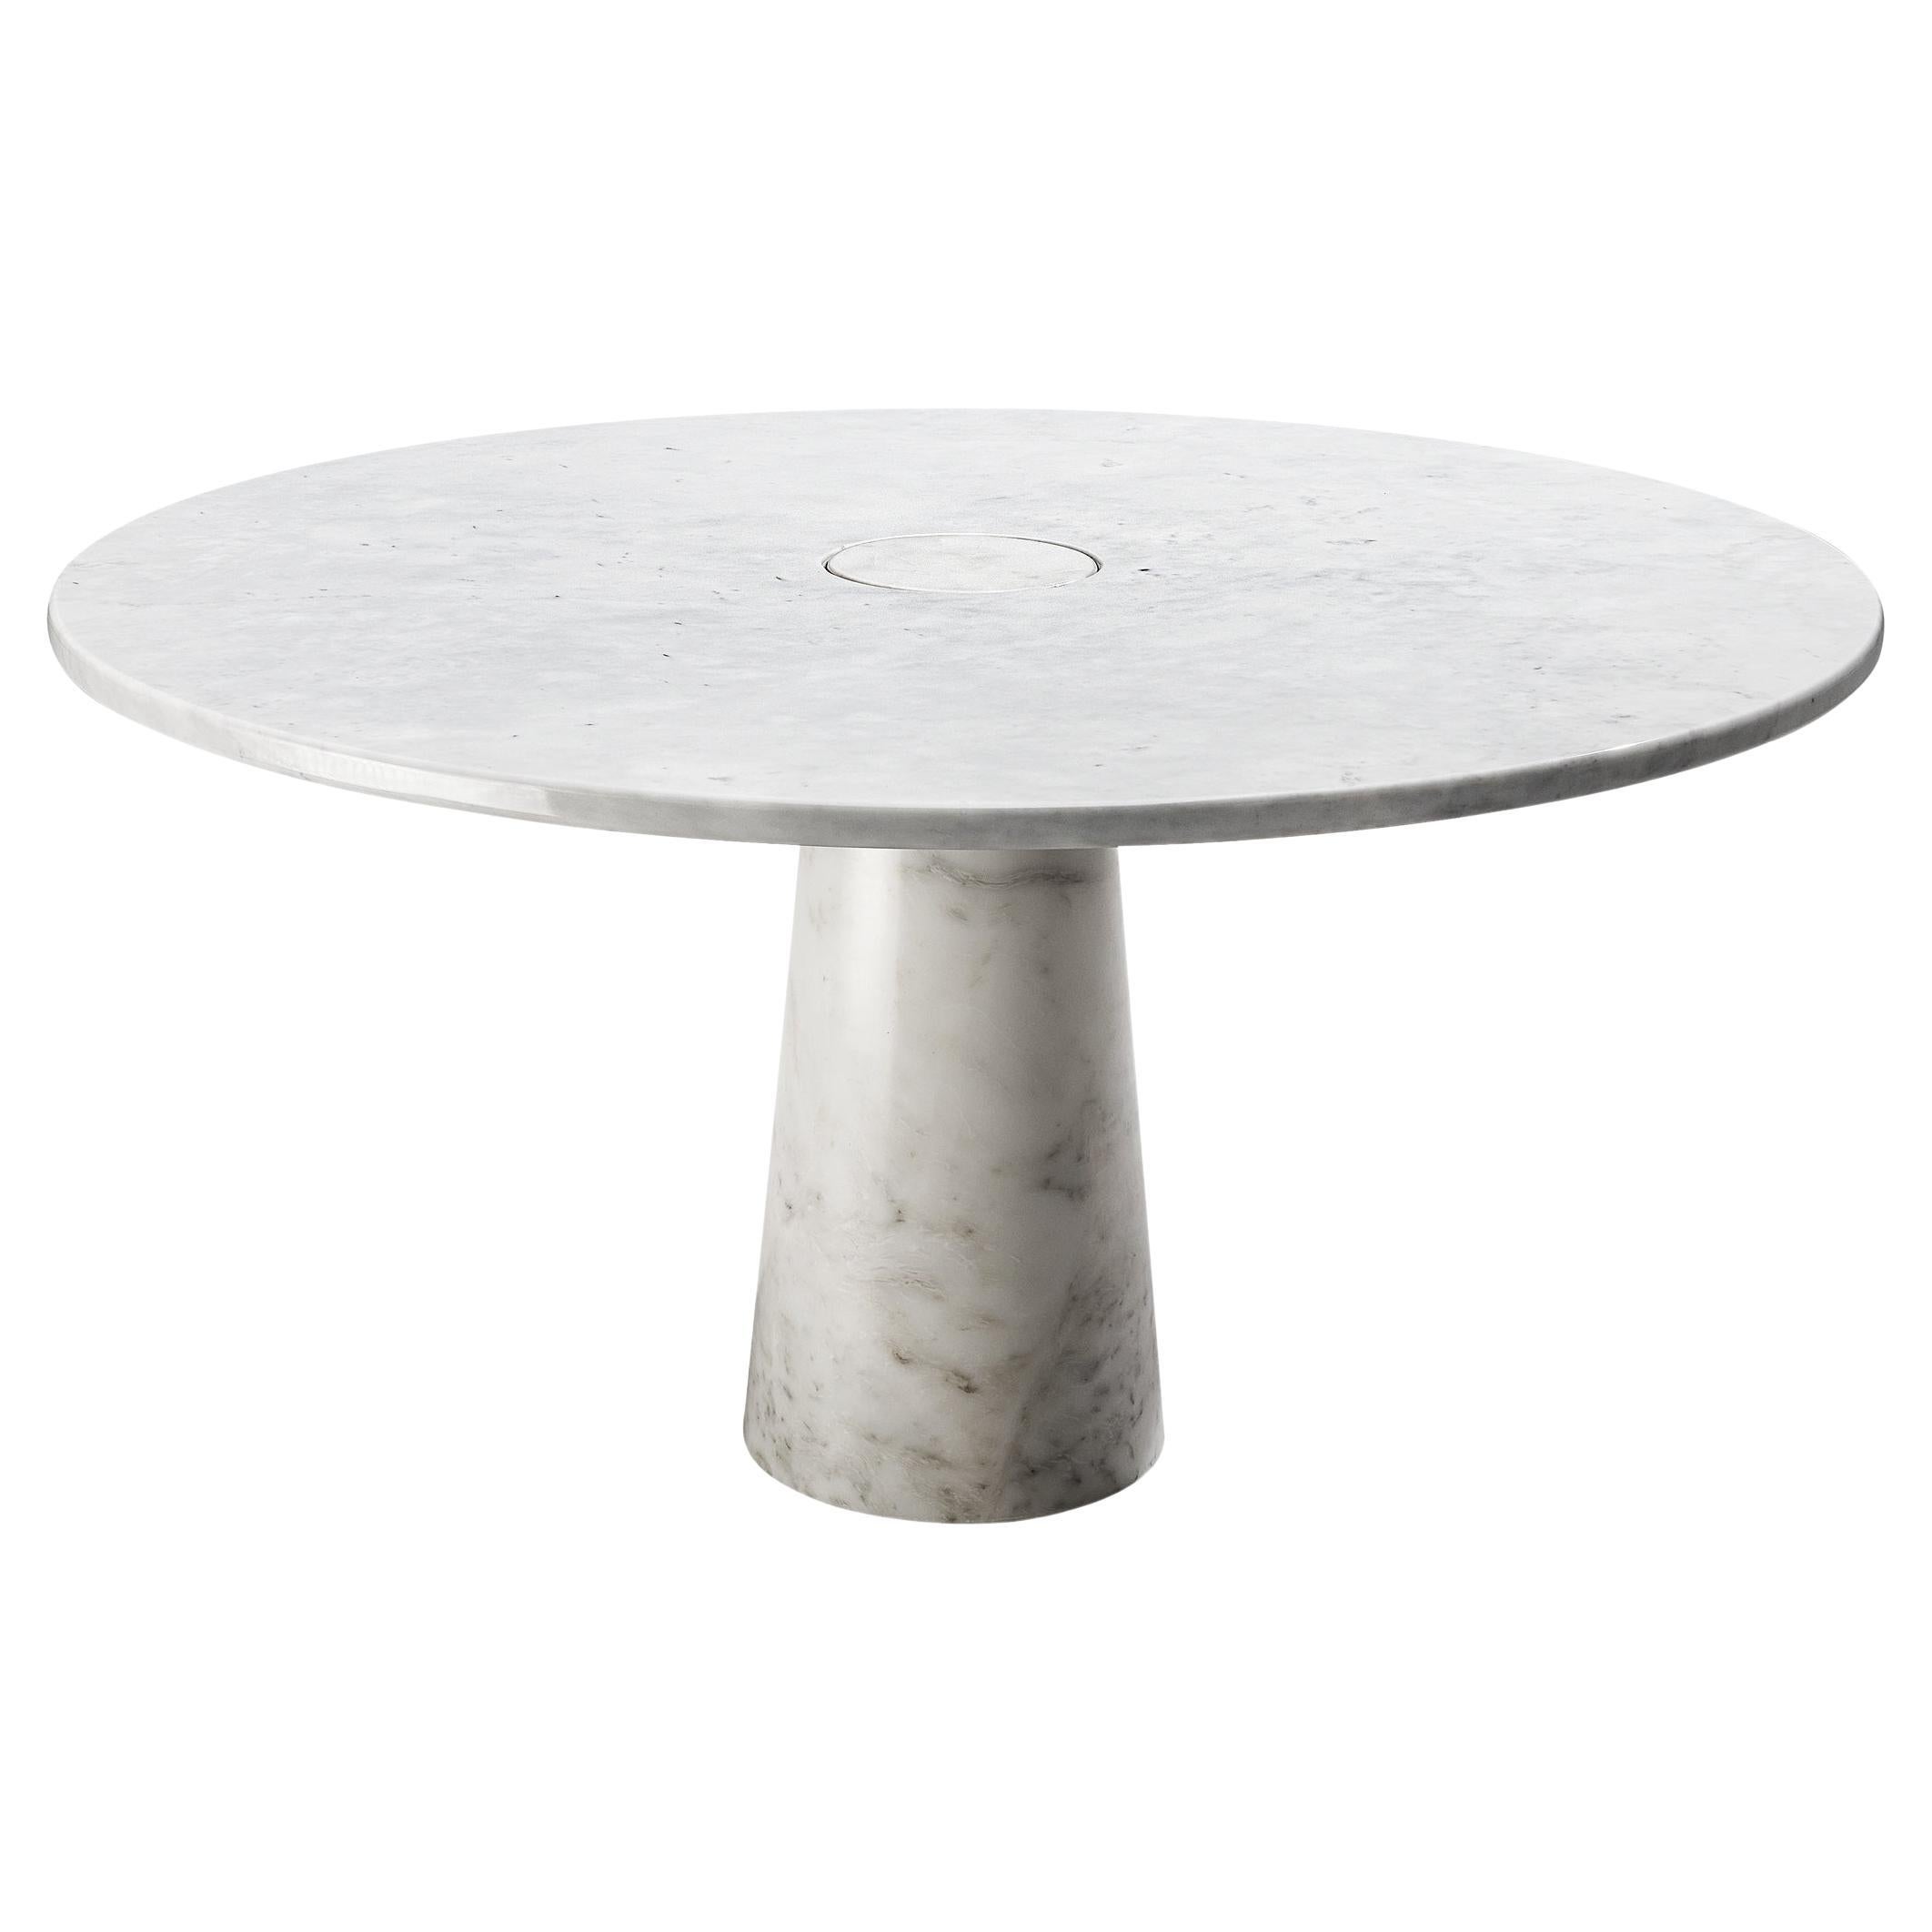 Angelo Mangiarotti for Skipper 'Eros' Dining Table in Carrara Marble  For Sale